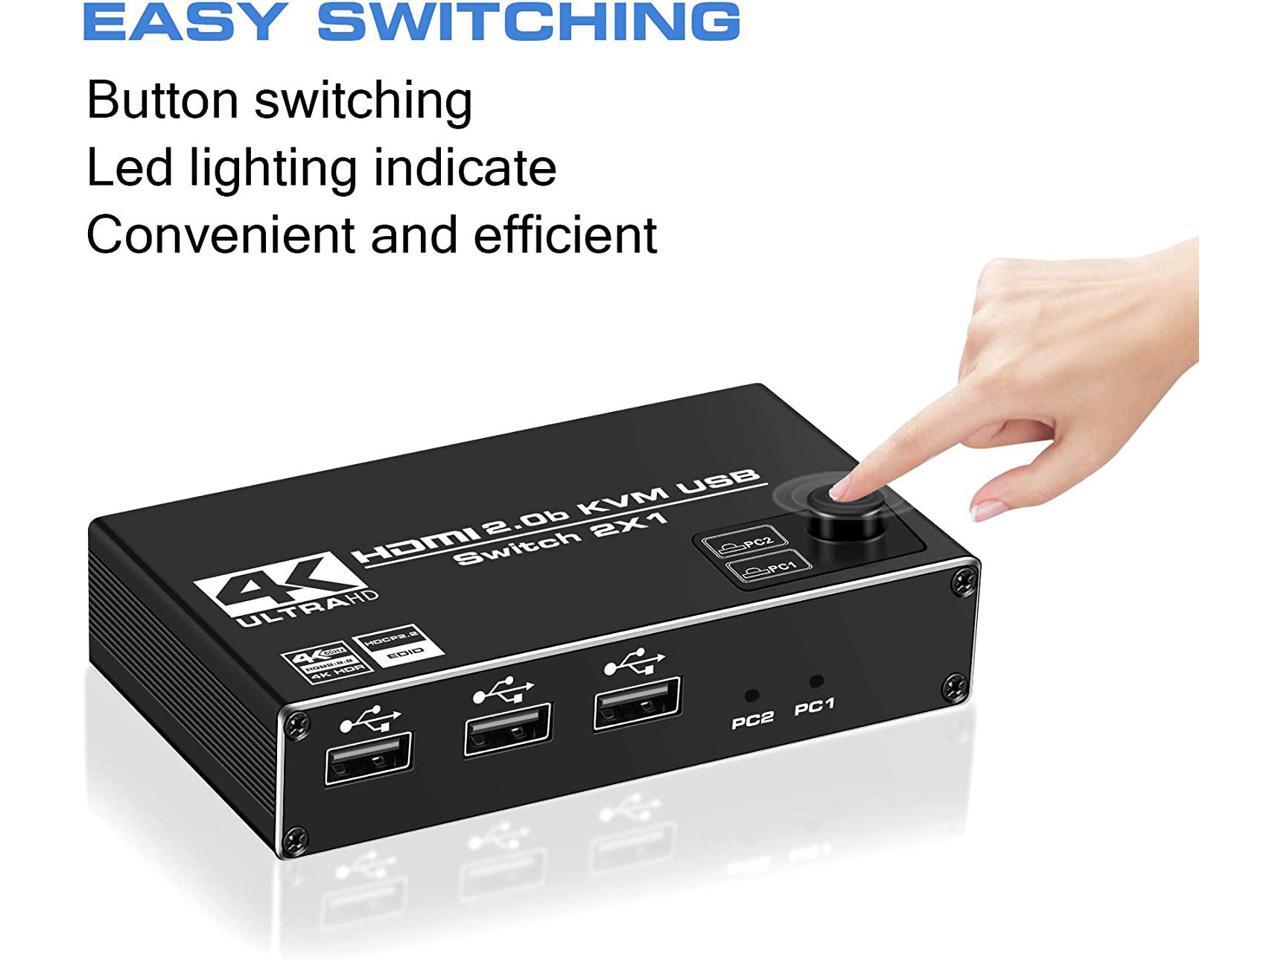 HF-HKU212: HDMI KVM Switch, 4K@60Hz USB Switch 2x1 HDMI2.0 Ports + 3X USB KVM Ports, Share 2 Computers to one Monitor, Support Wireless Keyboard and Mouse, USB Disk, Printer, USB Camera